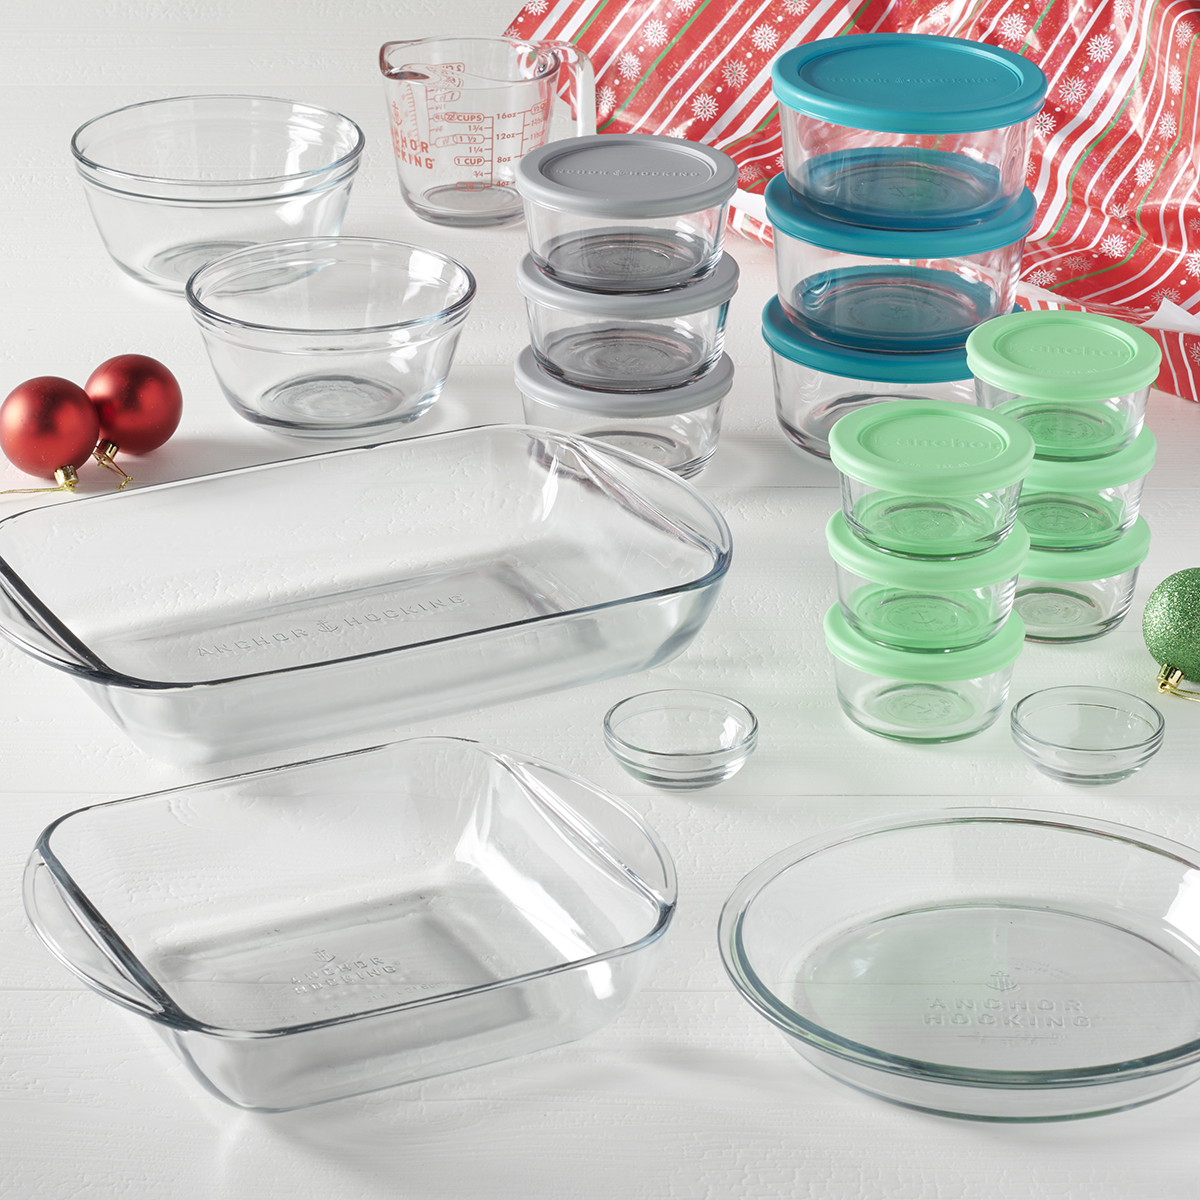 Anchor Hocking Glass Food Storage Containers & Glass Baking Dishes, 32 Piece Set - image 3 of 6